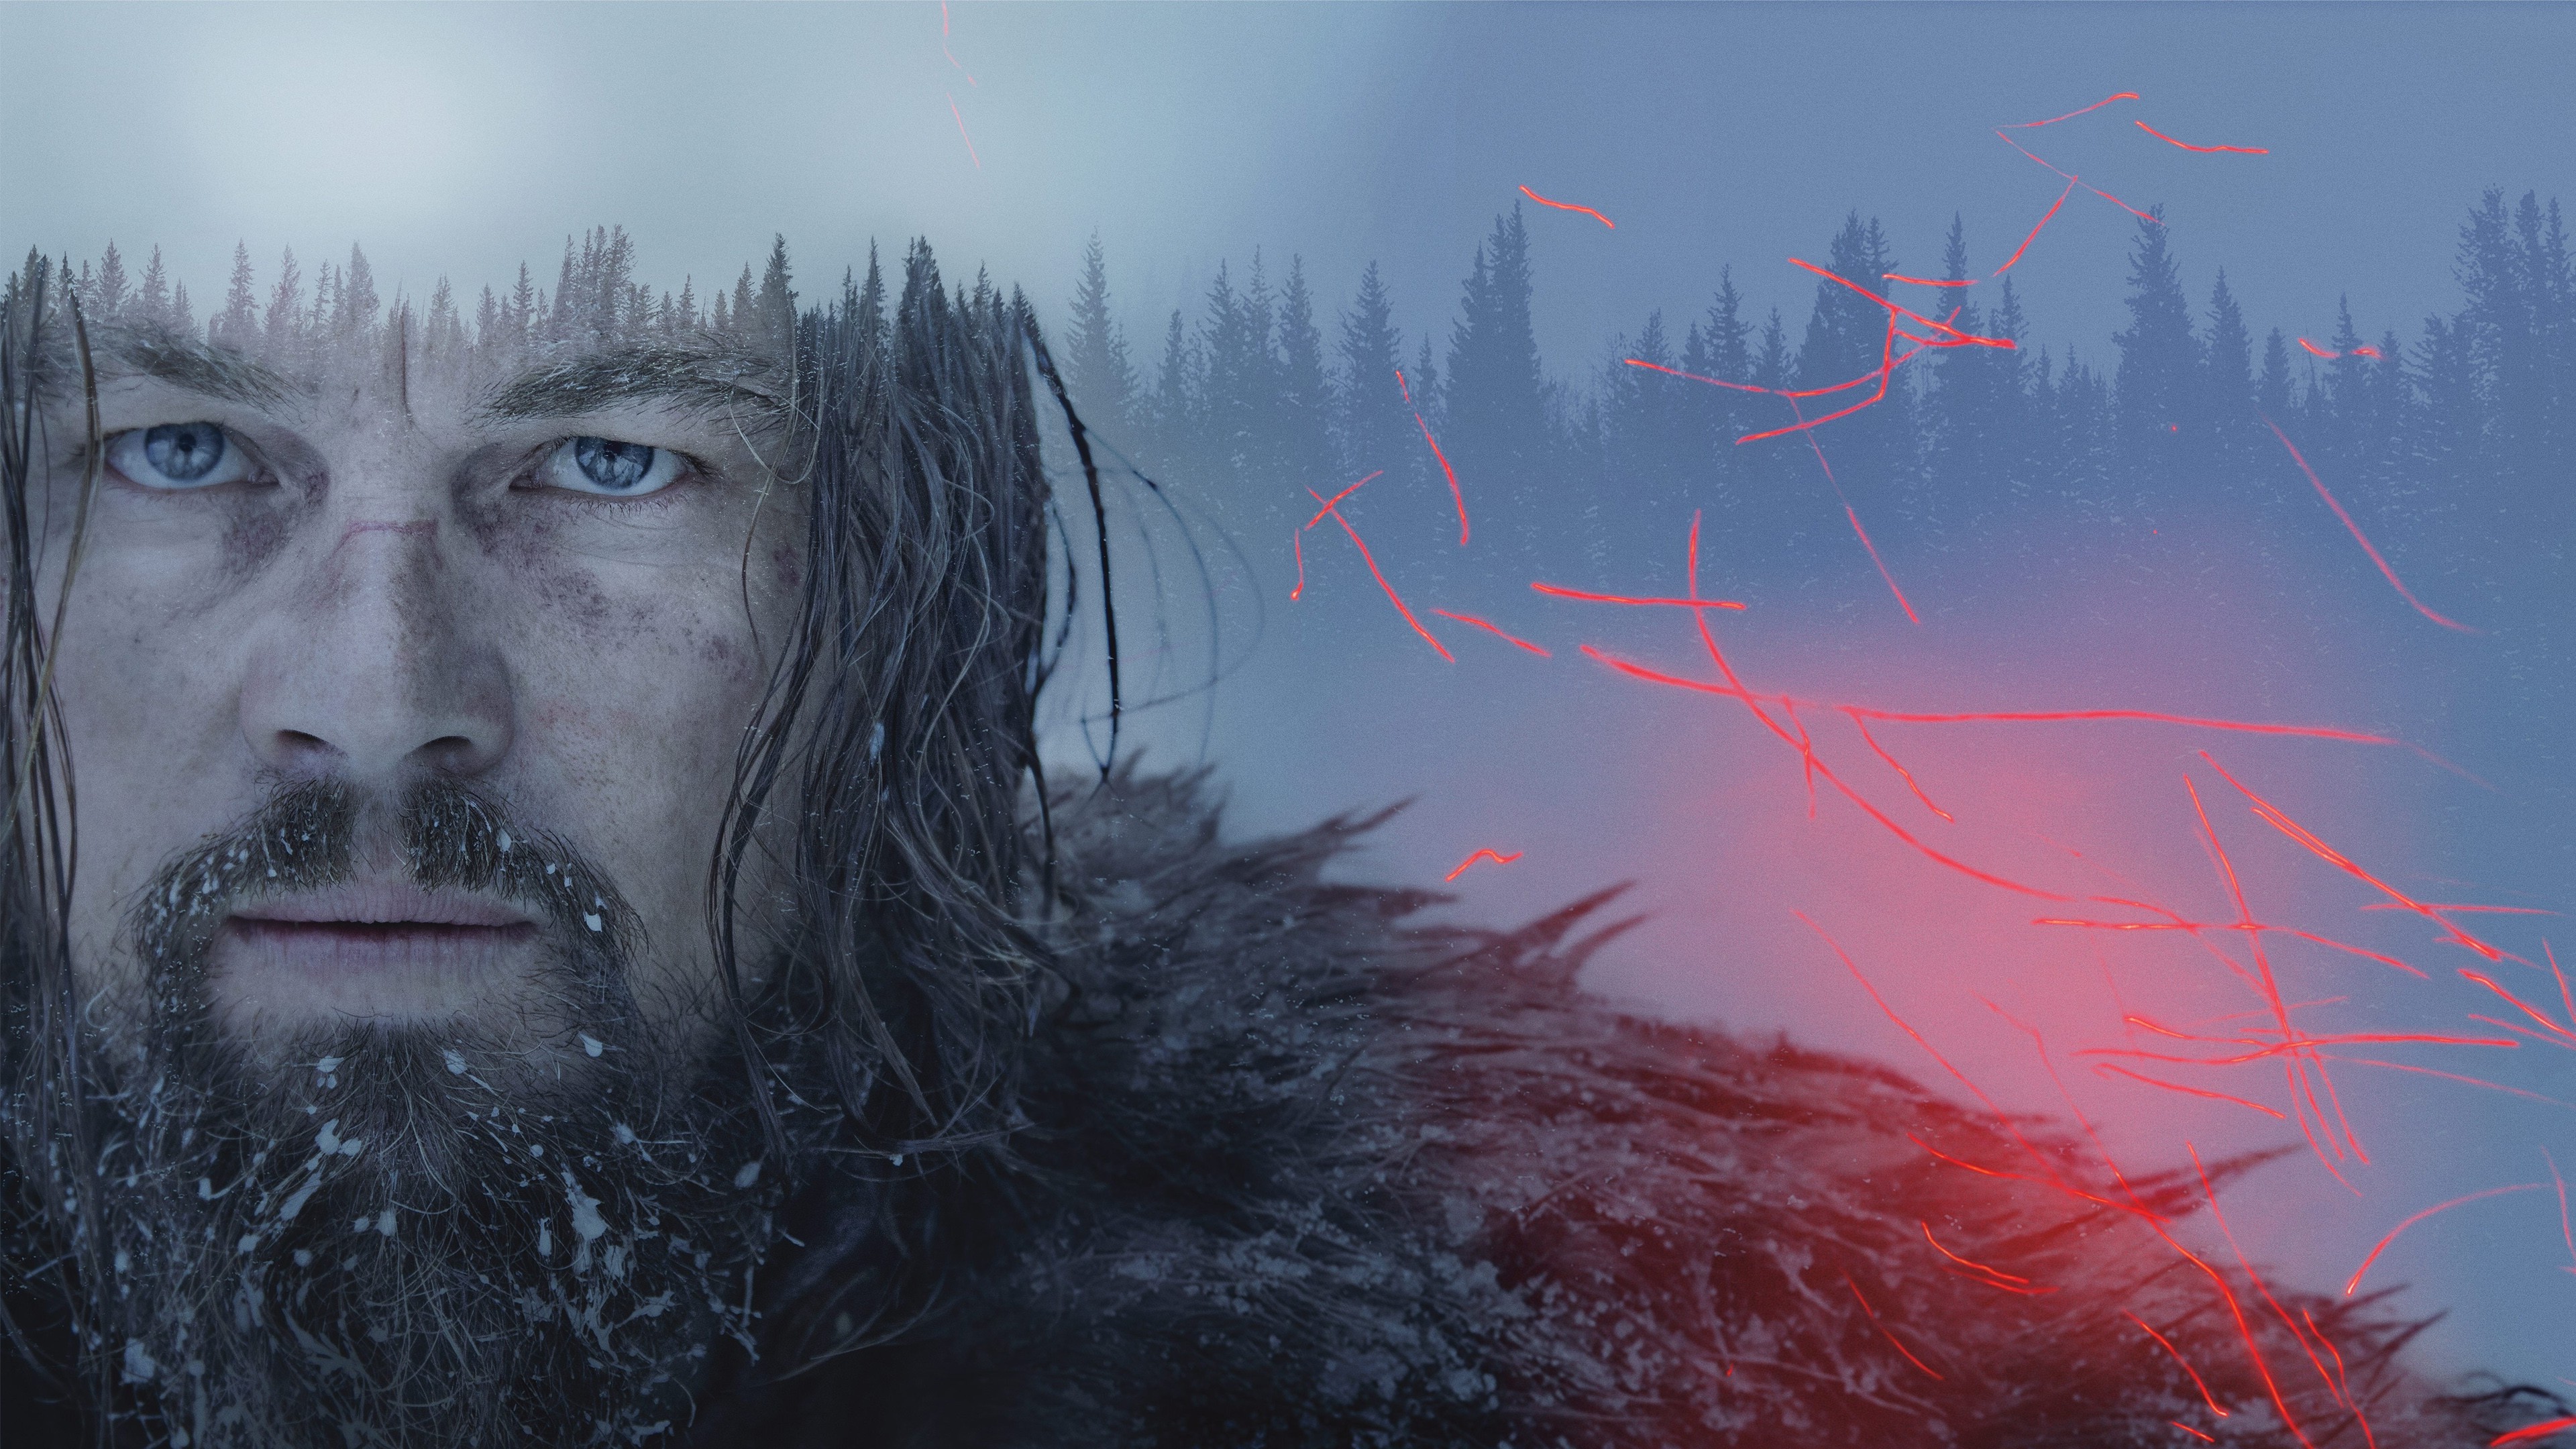 Full Hd Movie The Revenant English 1080p Download